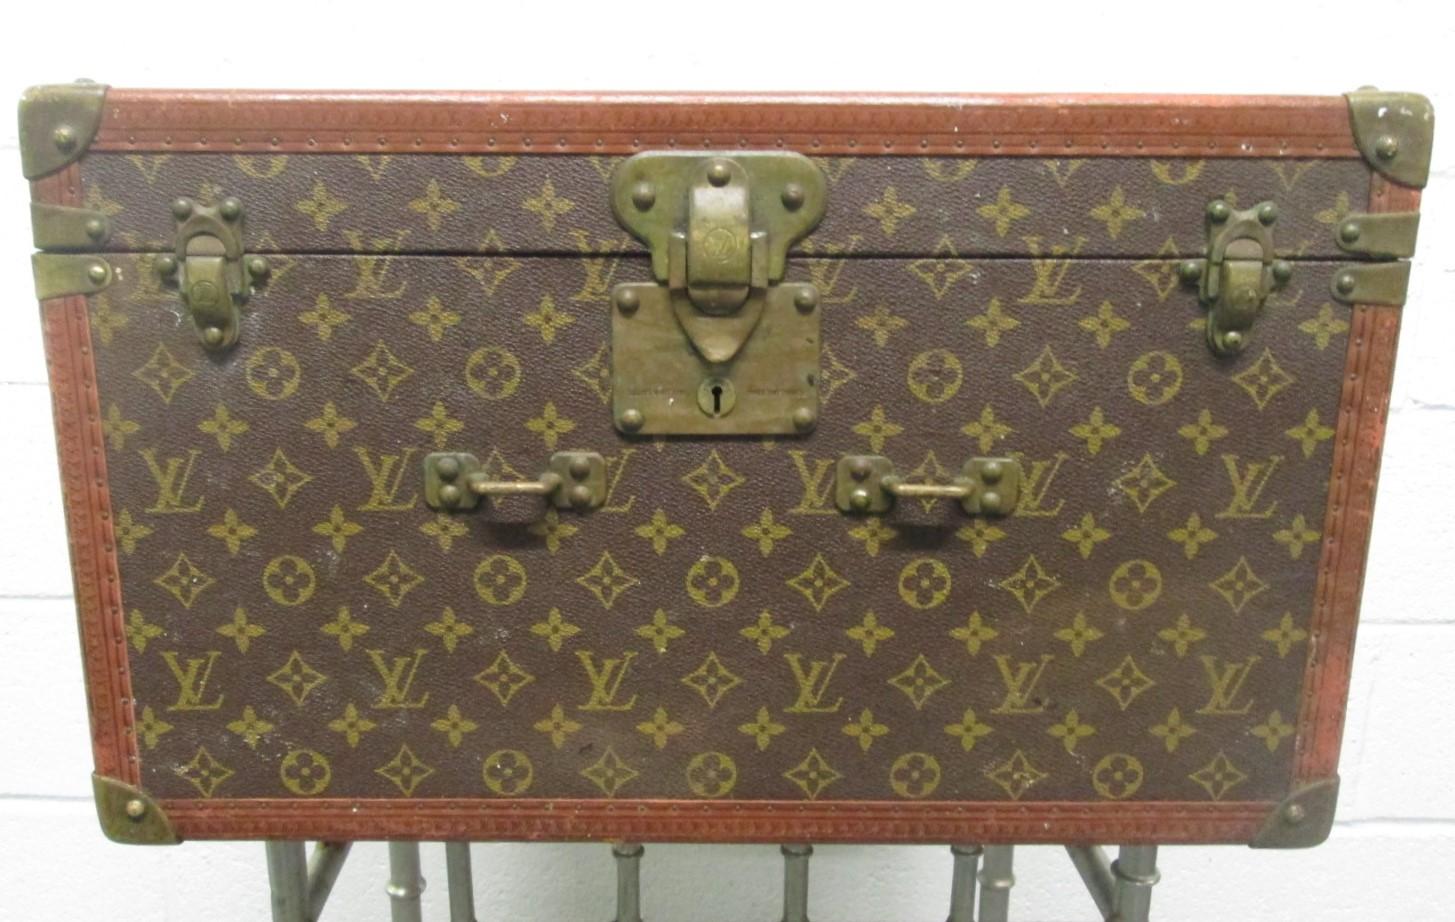 Vintage Louis Vuitton trunk / hat box. Has a silk interior with four corner pockets. Monogrammed on canvas with leather and brass hardware.